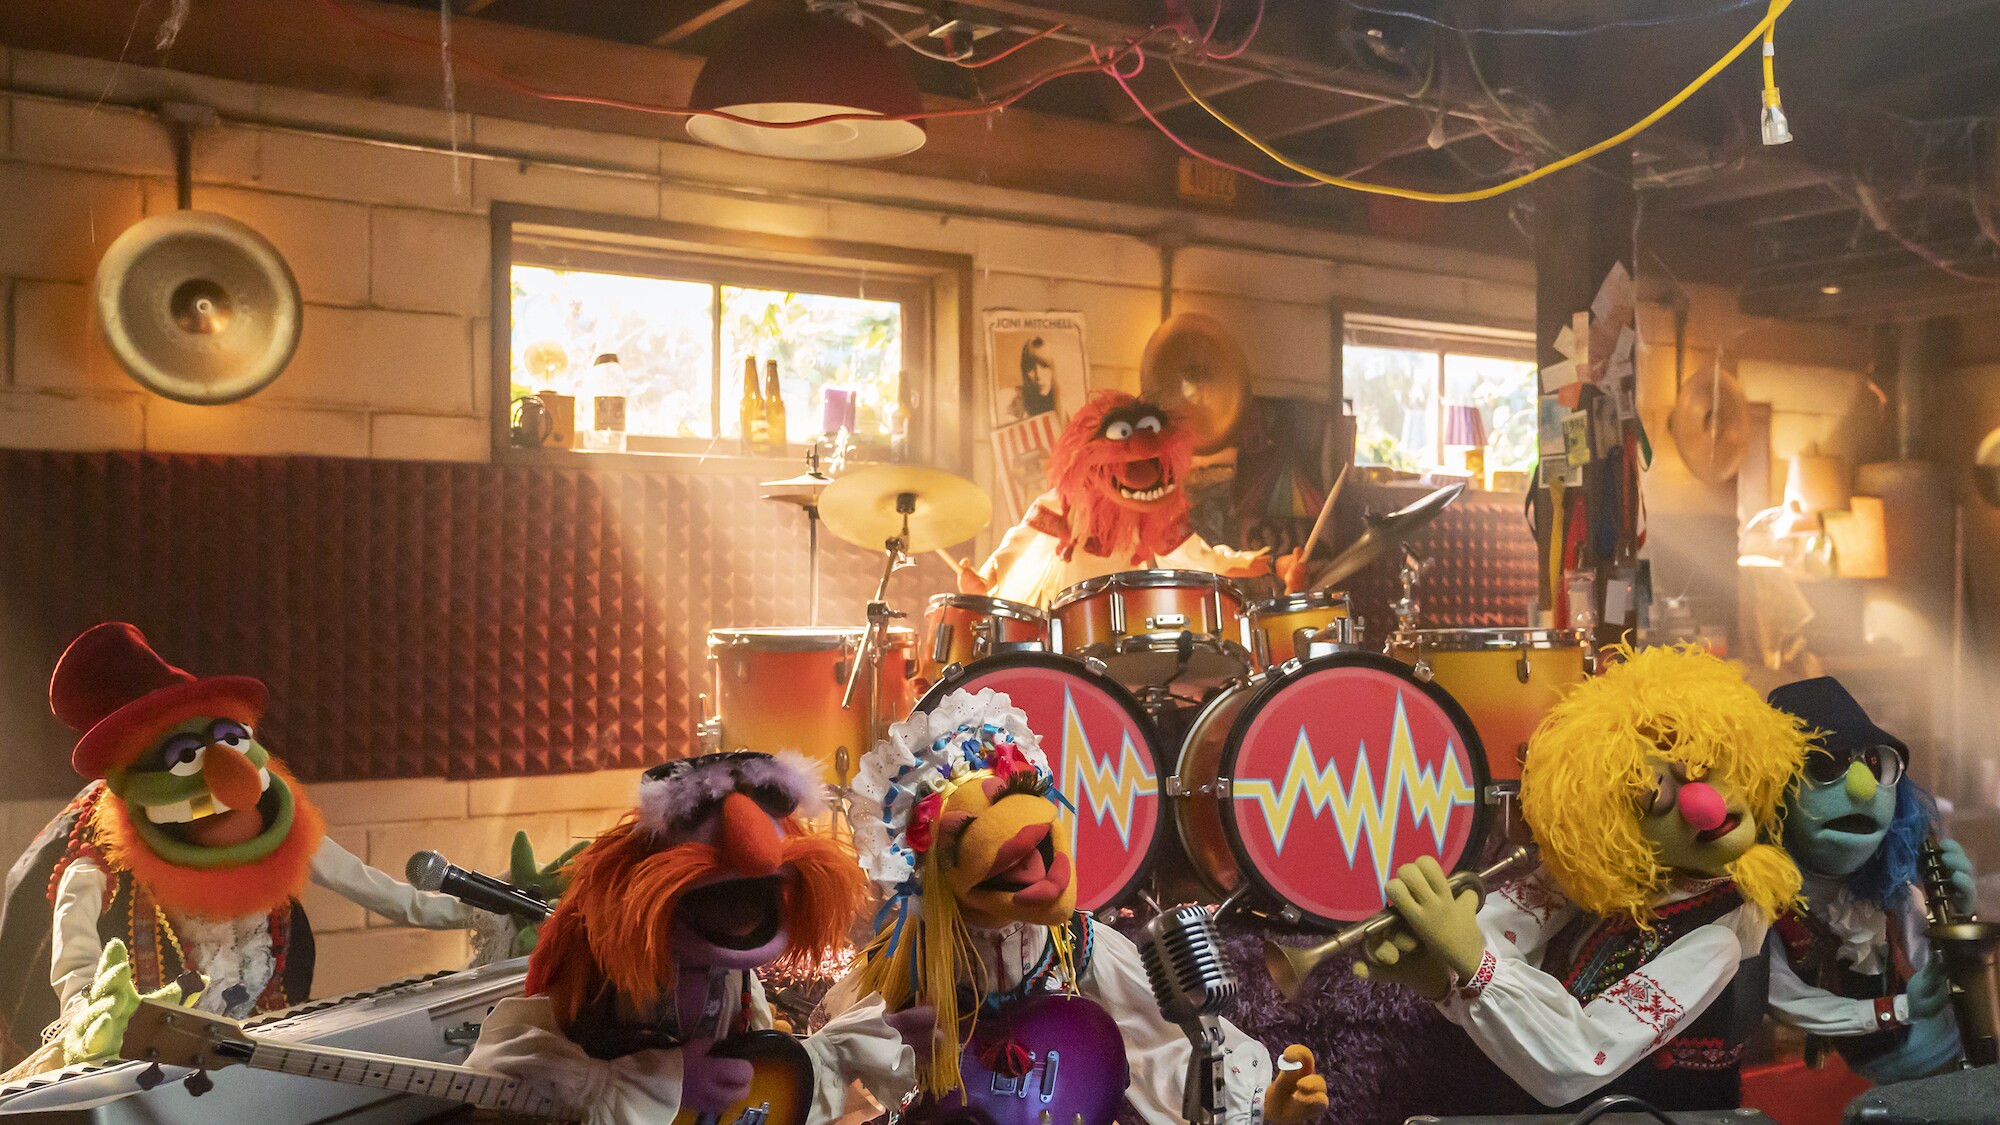 THE MUPPETS MAYHEM - “Track 4: The Times They Are A-Changin” (Disney/Mitch Haaseth) DR. TEETH, FLOYD PEPPER, JANICE, ANIMAL, LIPS, ZOOT